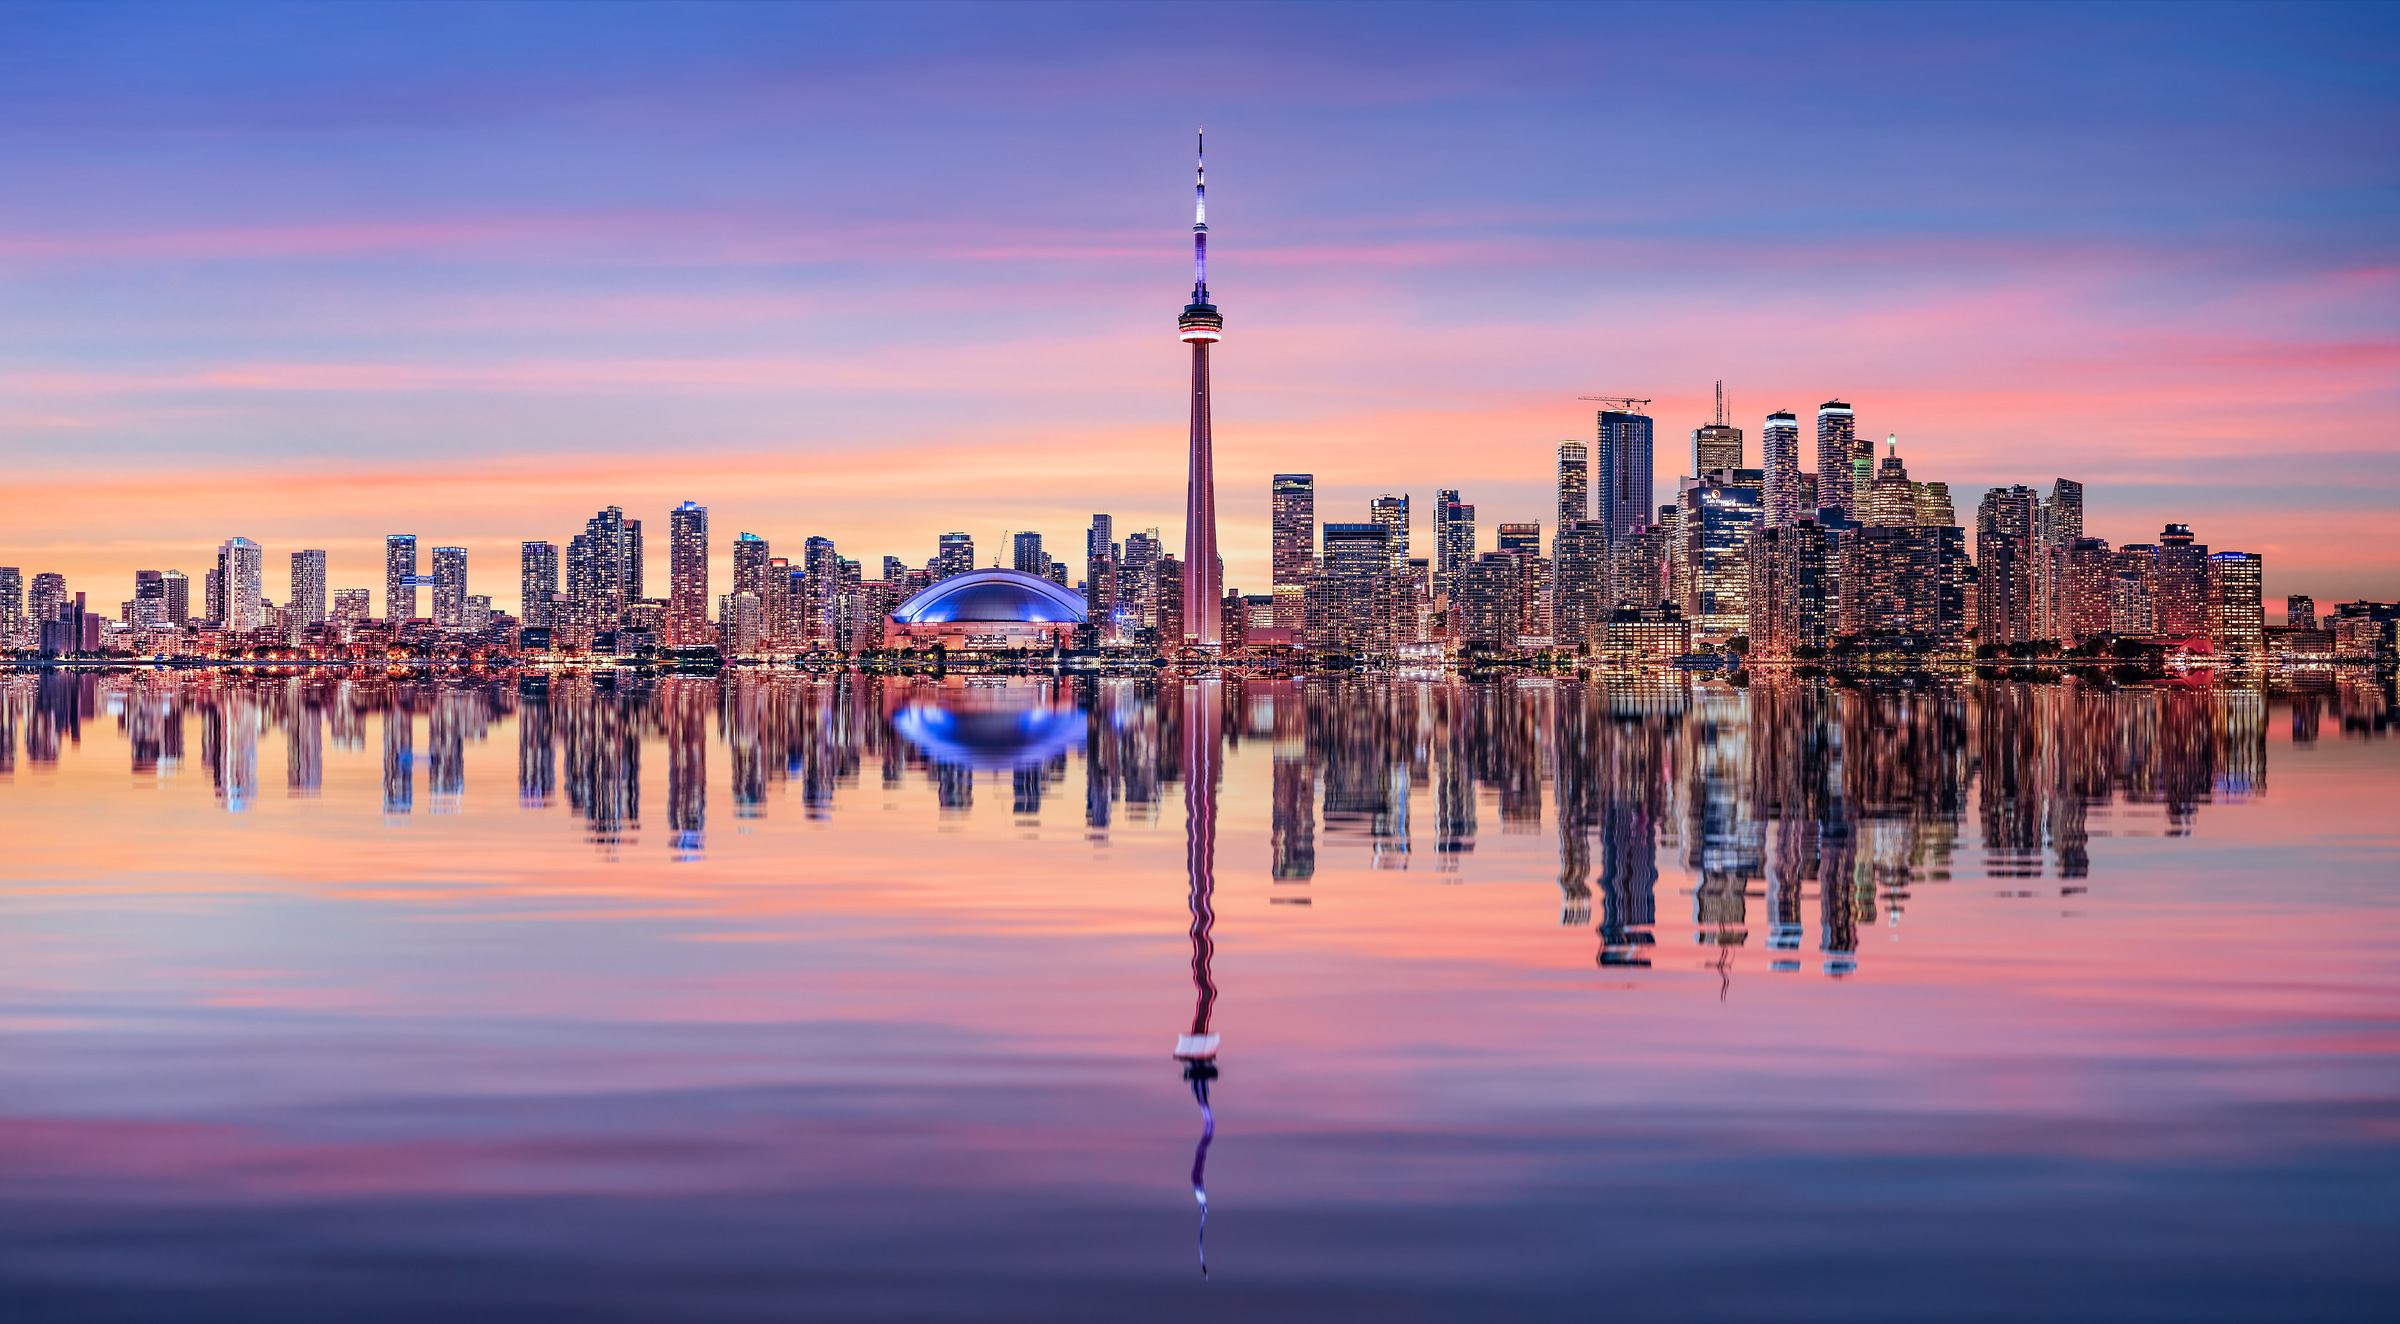 536 megapixels! A very high resolution, large-format VAST photo print of the Toronto skyline at sunset; cityscape photograph created by Chris Collacott in Toronto, Ontario, Canada.